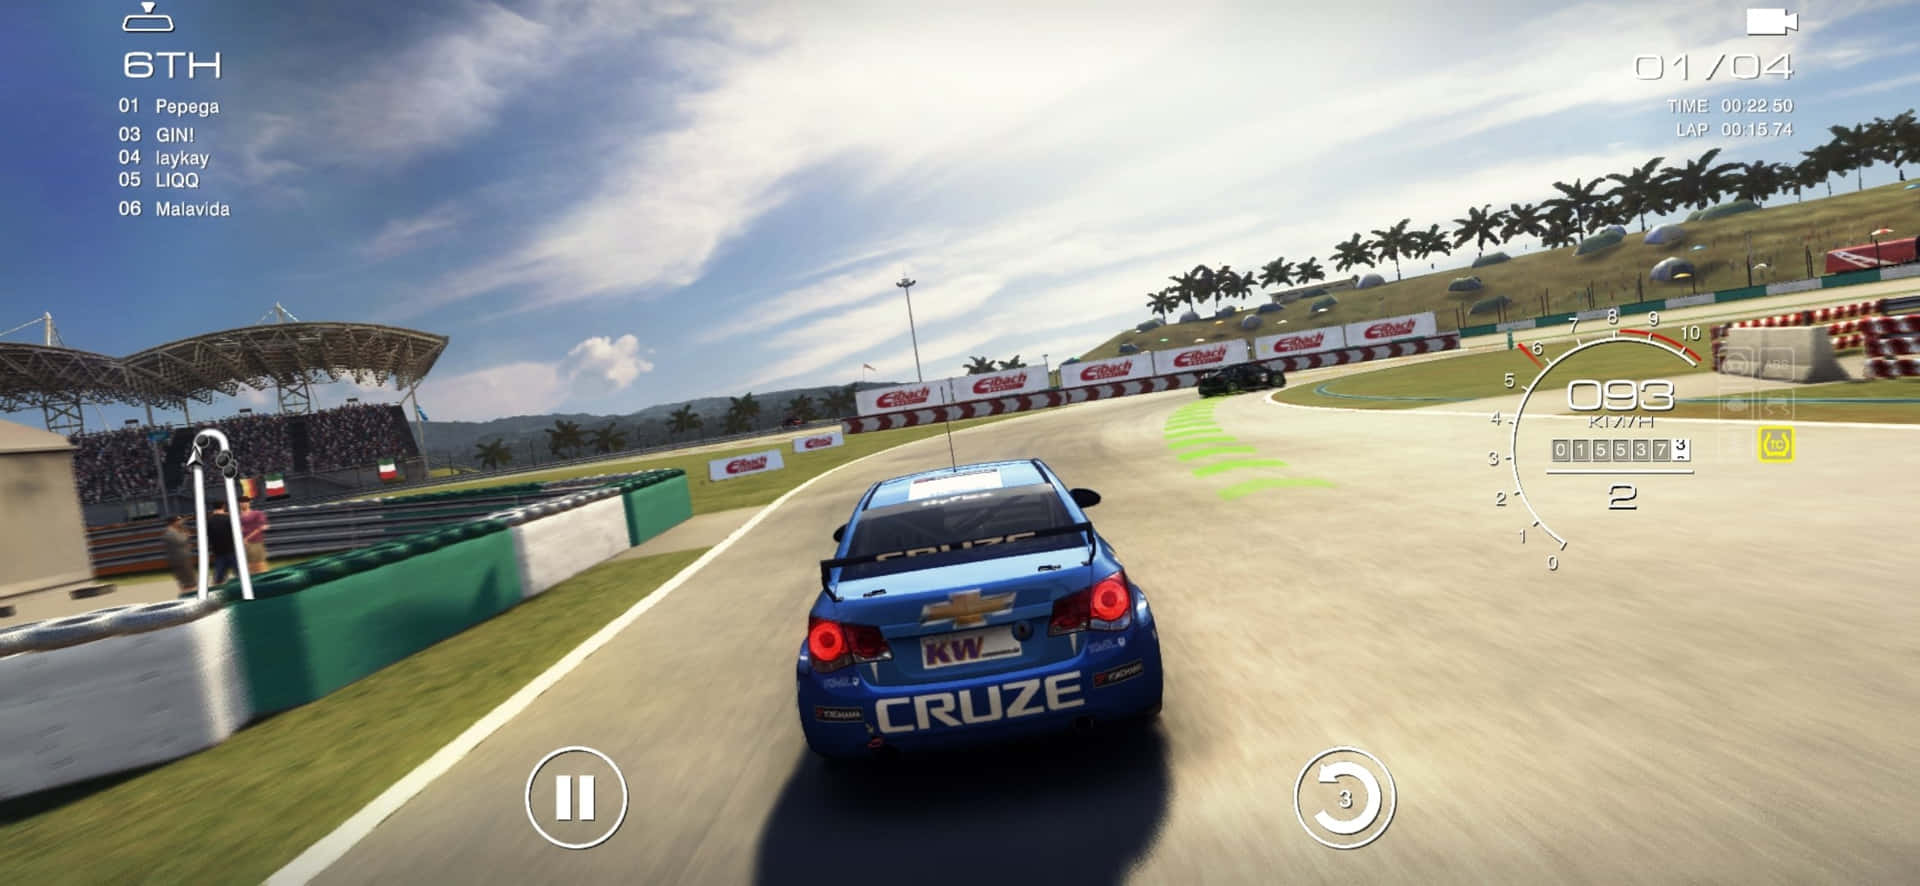 A Racing Game With A Blue Car Driving On A Track